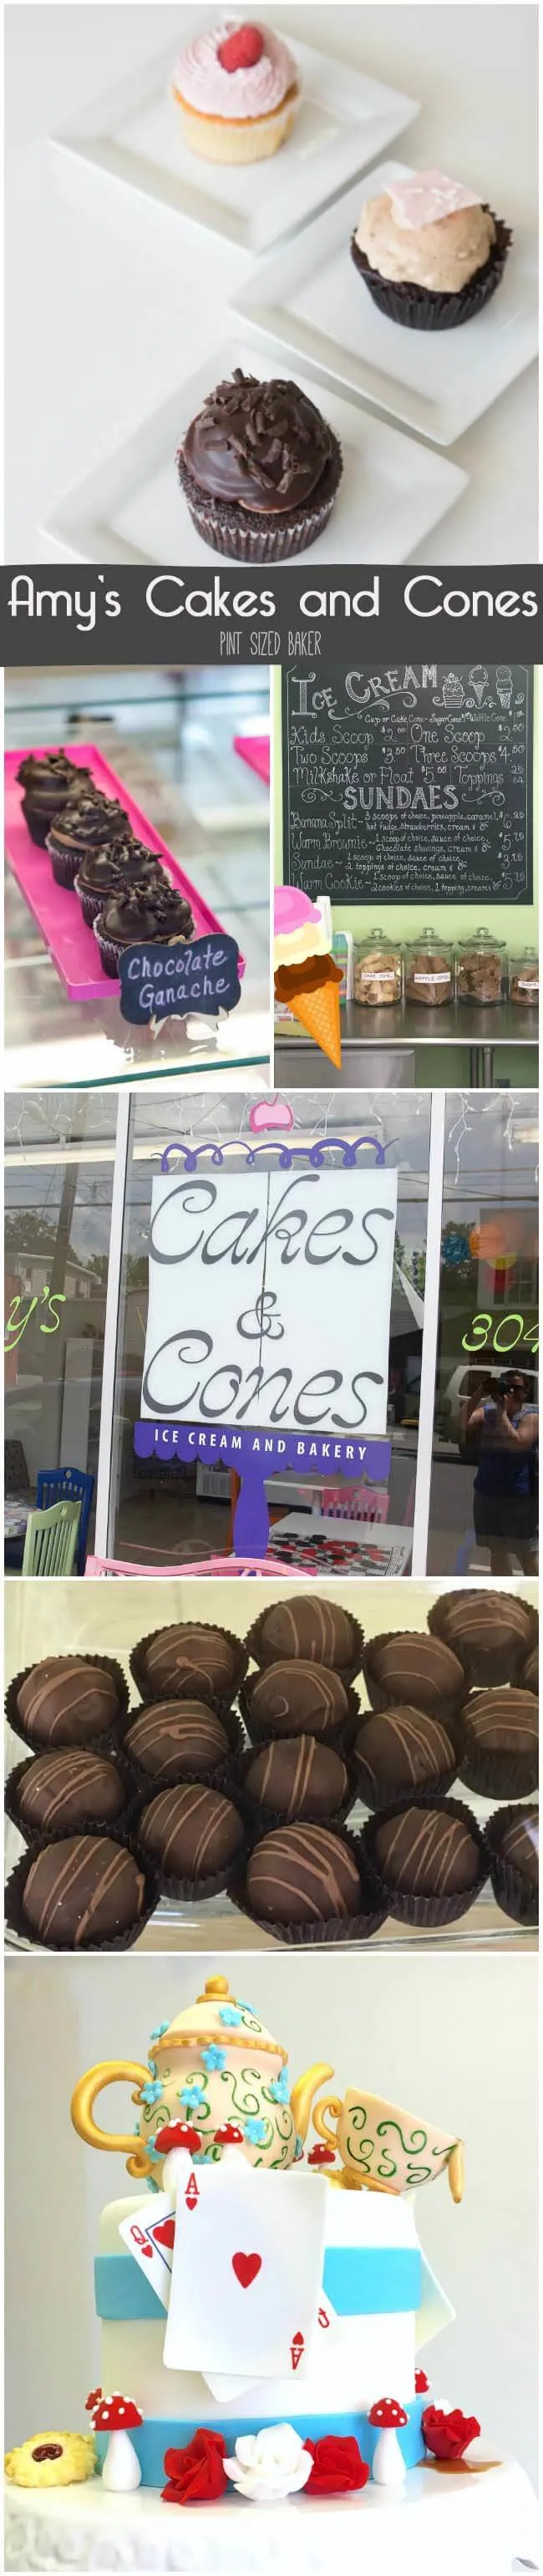 When in Greenbrier County, make a pit stop into Amy's Cakes and Cones on Lewisburg, WV.